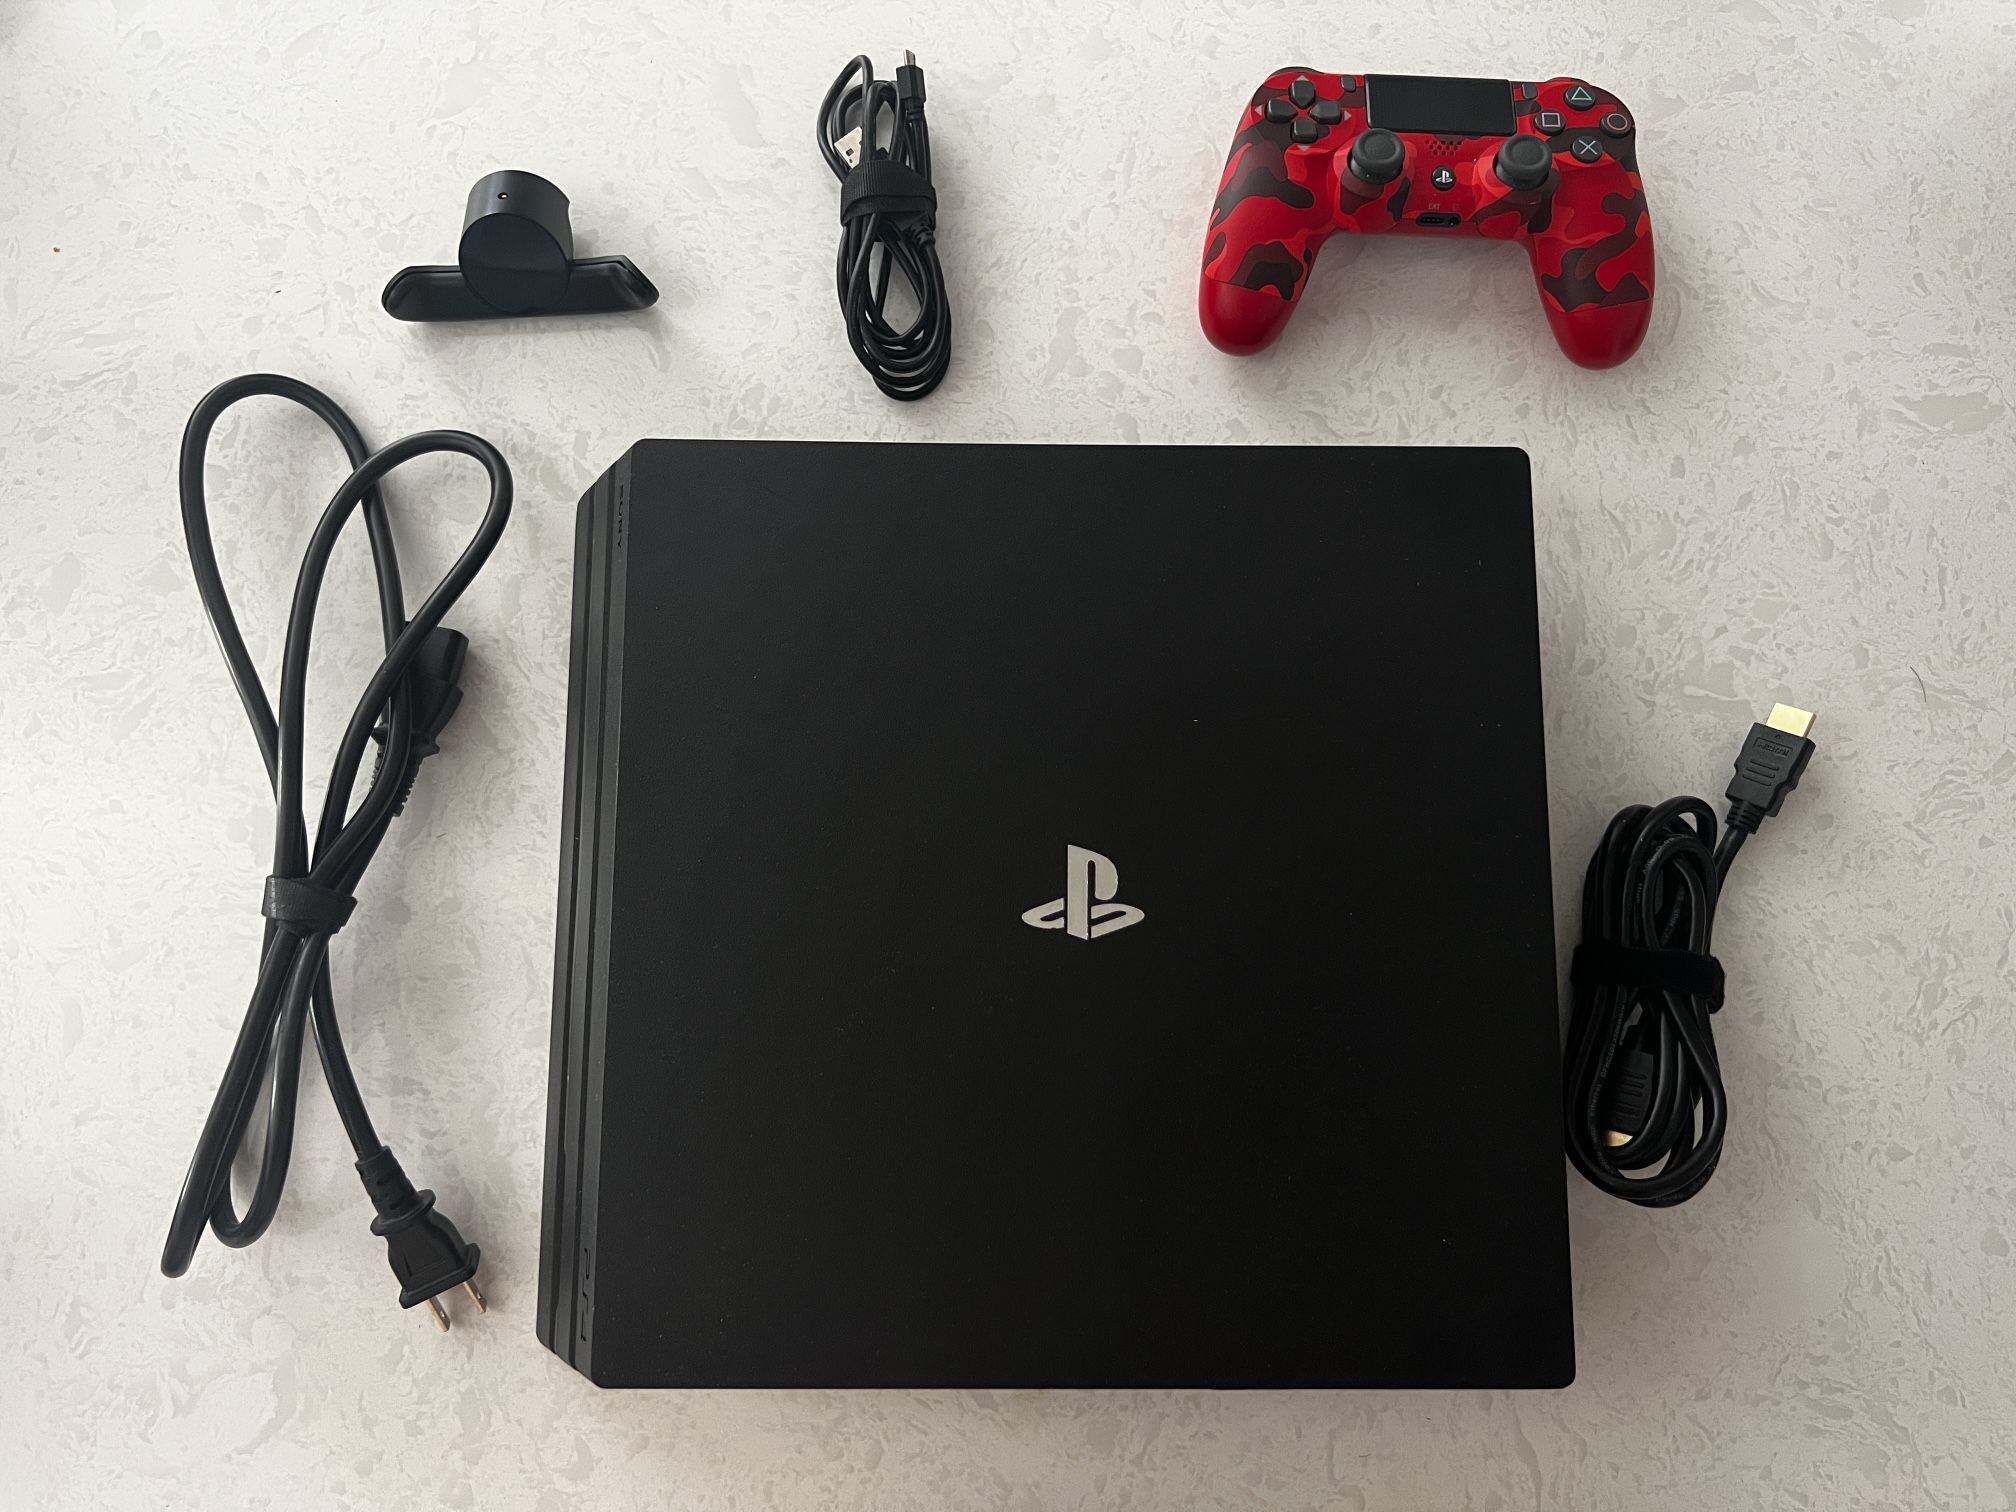 Sony Playstation 4 PRO with Upgraded 2Tb for Sale in Ridgecrest, OfferUp